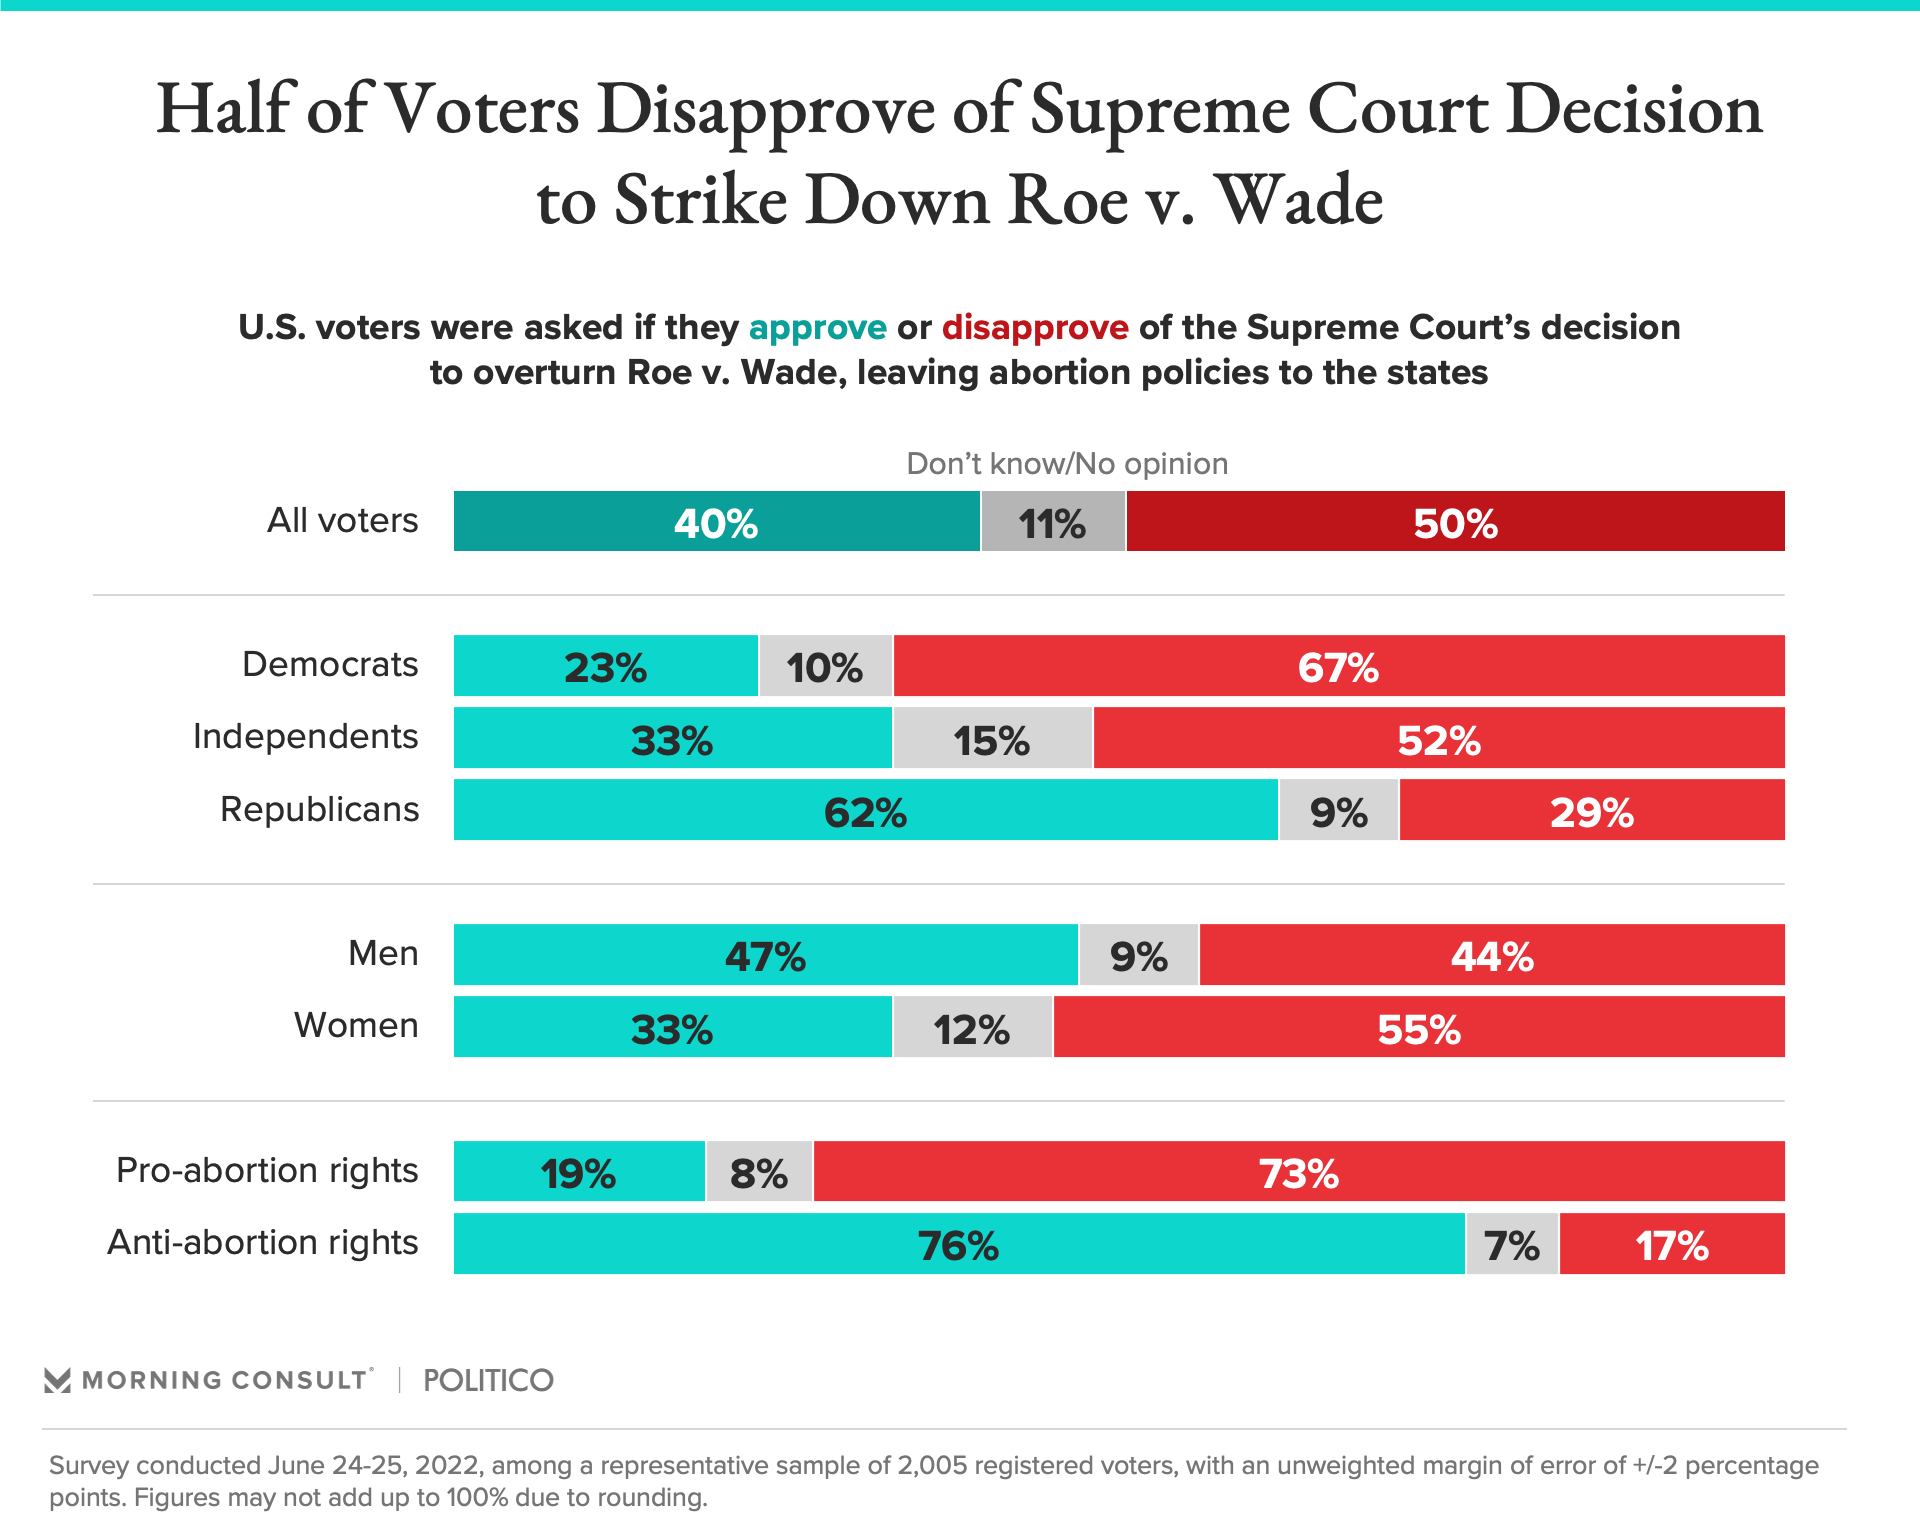 50% of voters disapprove of the Supreme Court&rsquo;s decision to overturn Roe v. Wade, while 40% approve